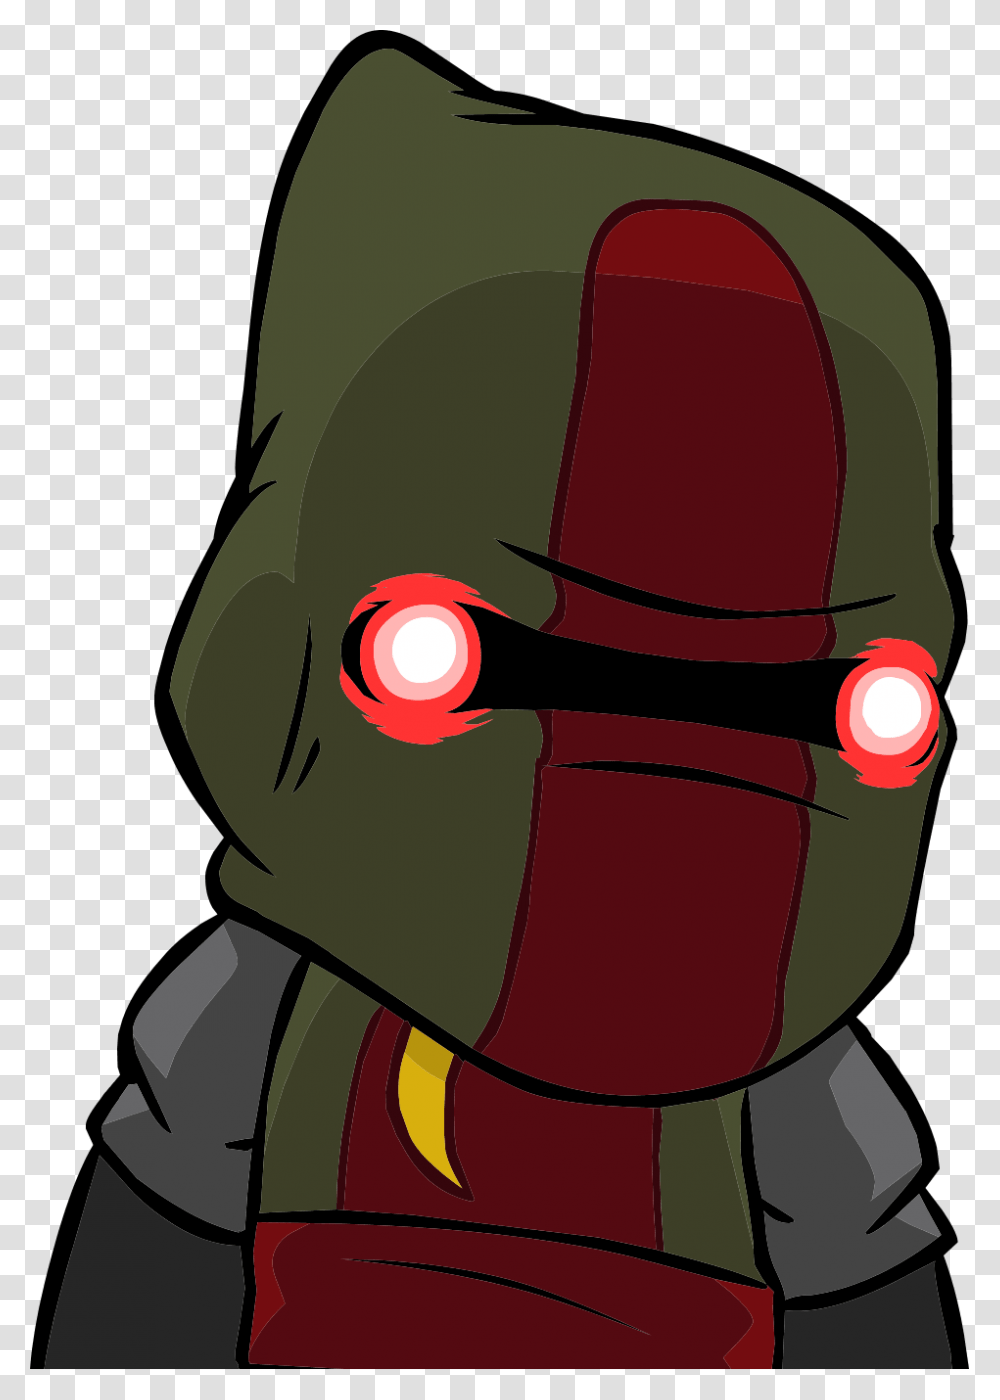 Castle Crashers Wiki Castle Crashers Remastered Cult Minion, Weapon, Weaponry, Armor, Bomb Transparent Png